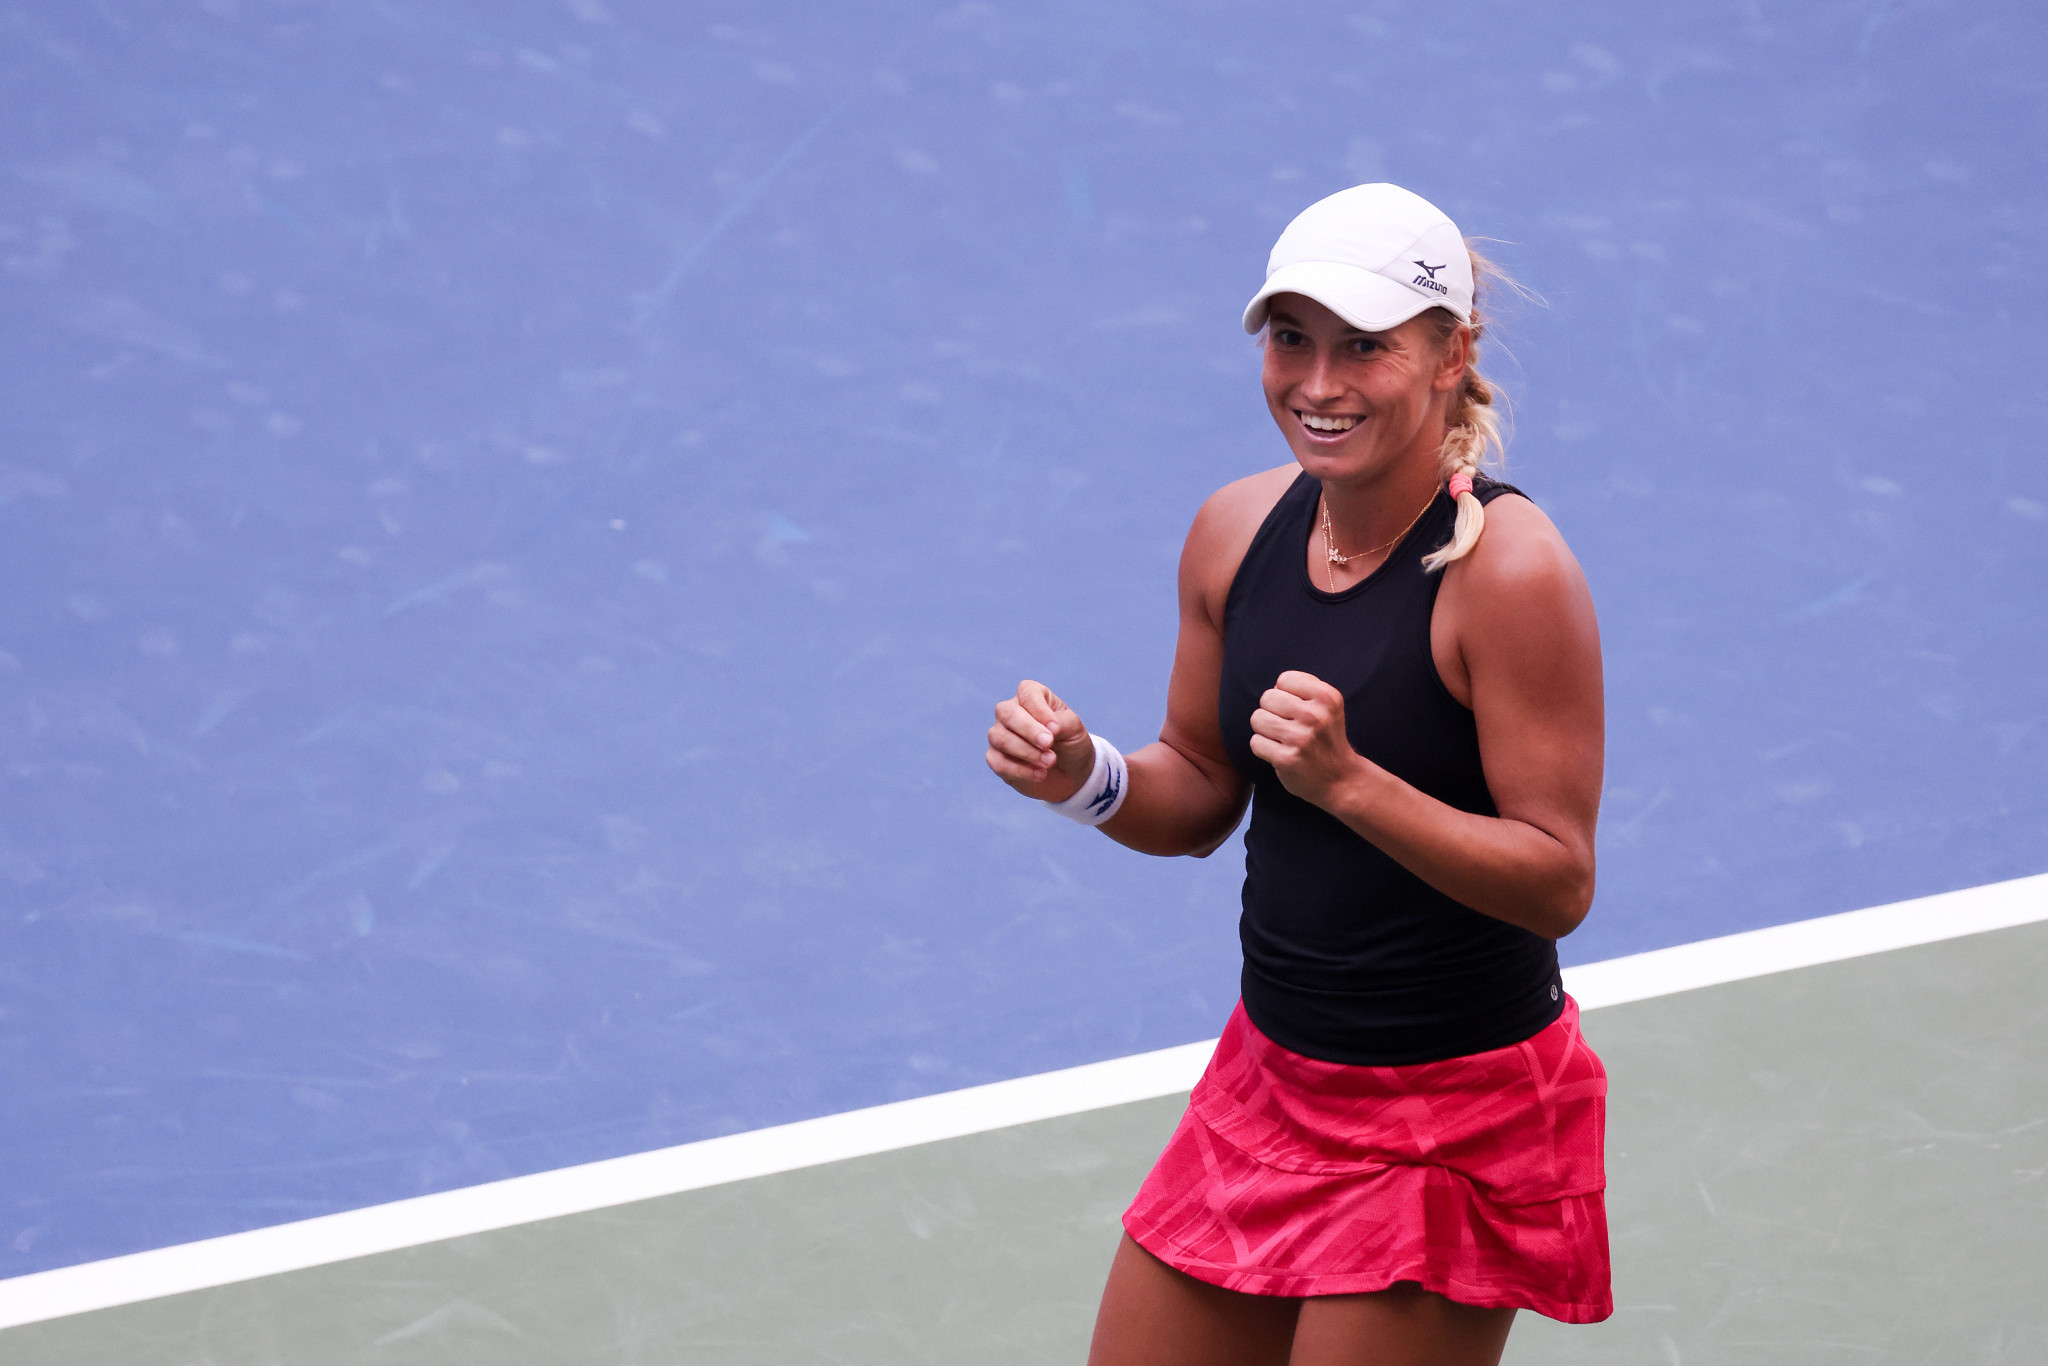 Kazakhstan's Yulia Putintseva celebrates after knocking out eighth seed Petra Martic in the US Open round of 16 ©Getty Images